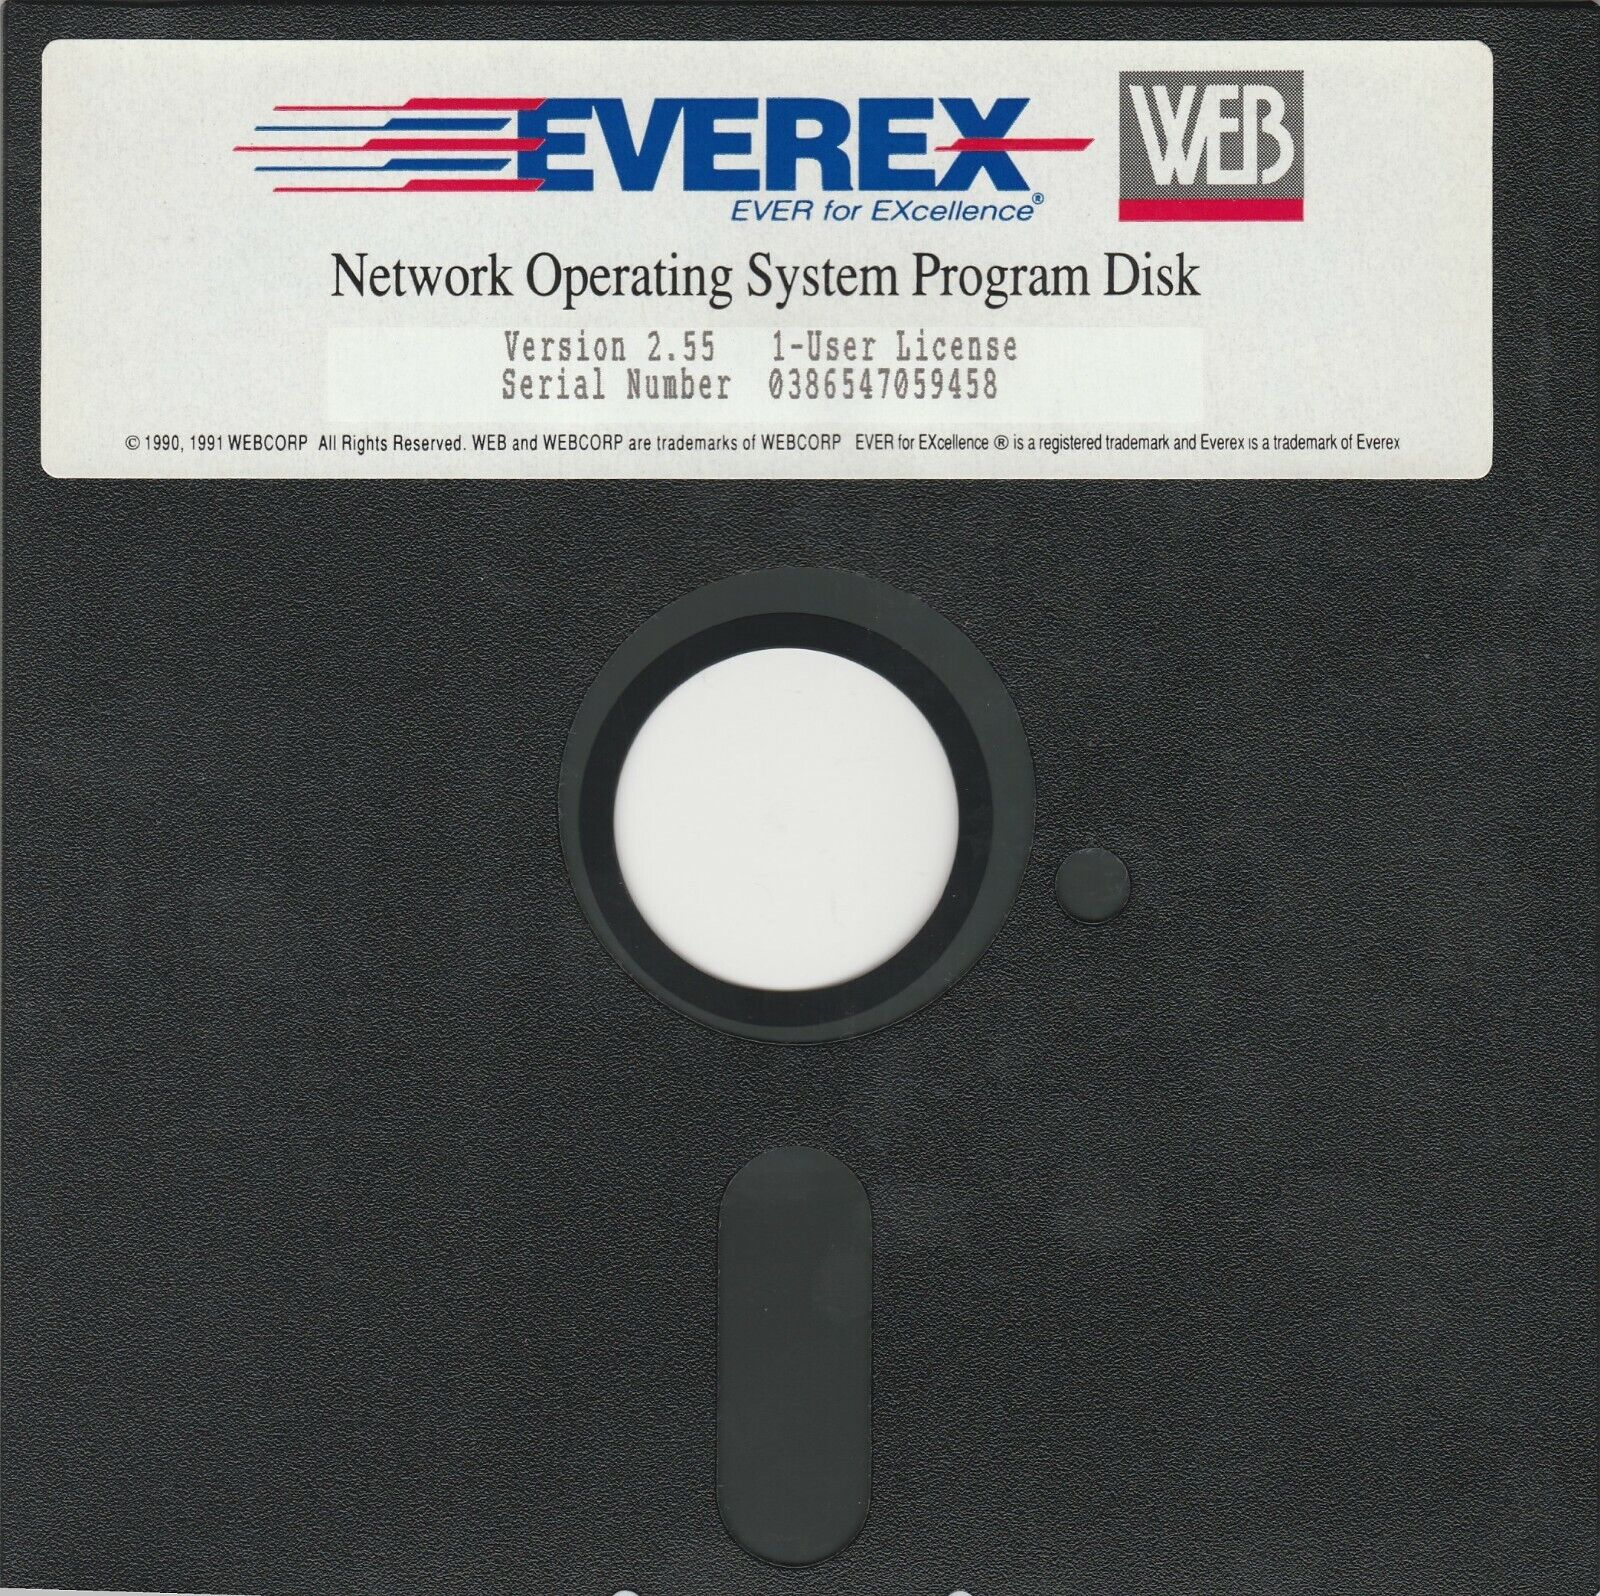 Network Operating System Program Disk by Everex Web / Webcorp ~ Ver. 2.55 ~ 1991